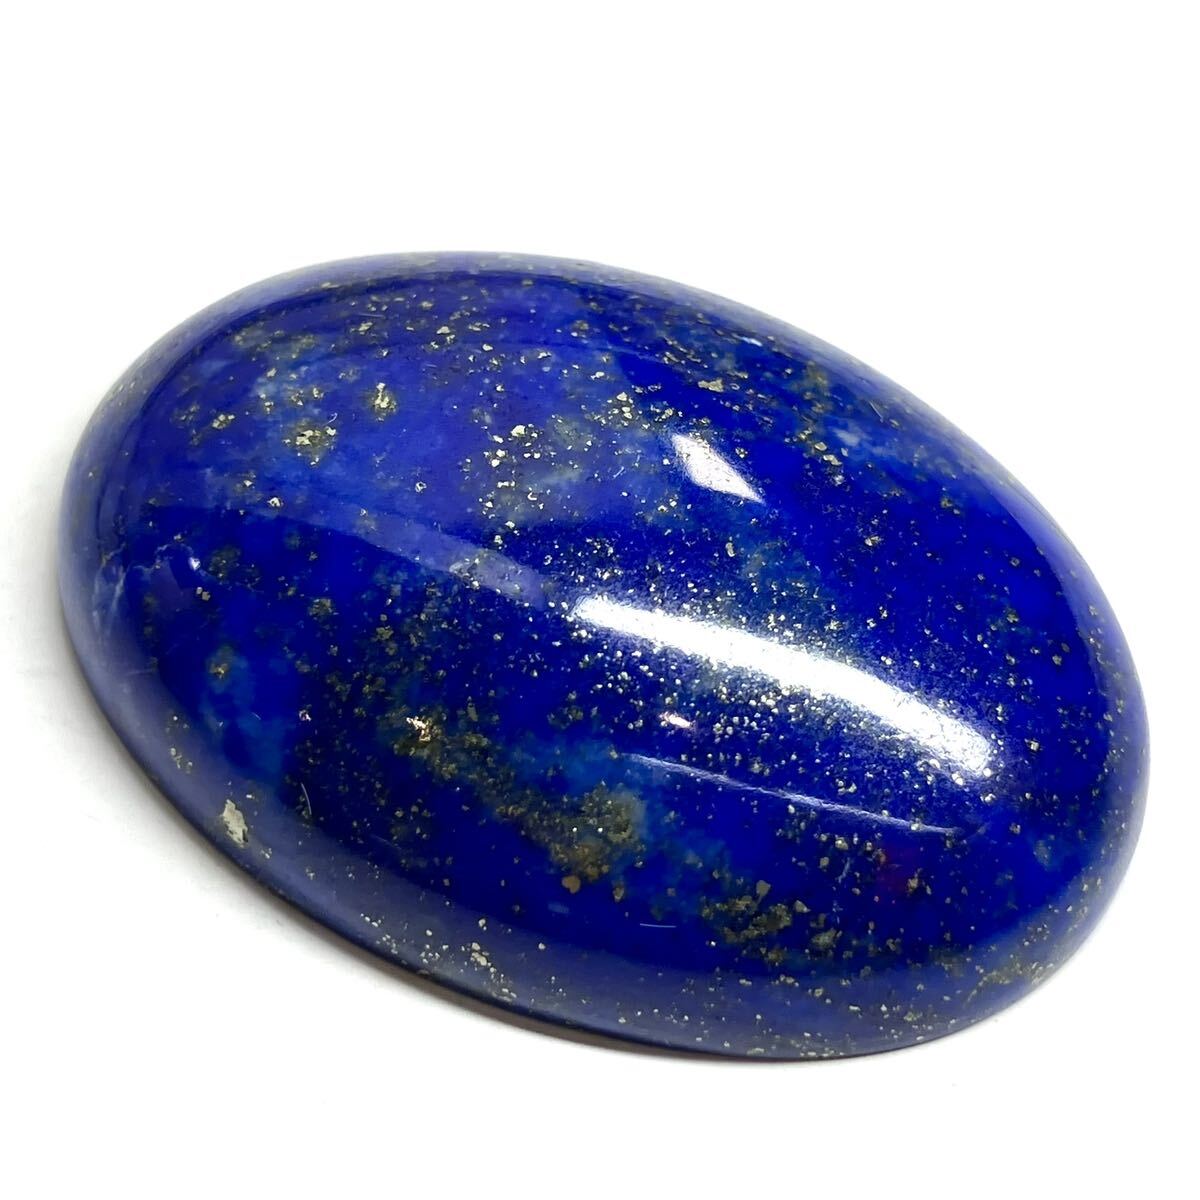  large grain!!* natural lapis lazuli 66.537ct*M approximately 34.9×24.8mm loose unset jewel gem jewelry jewelry lapis lazuli lapis lazuli 